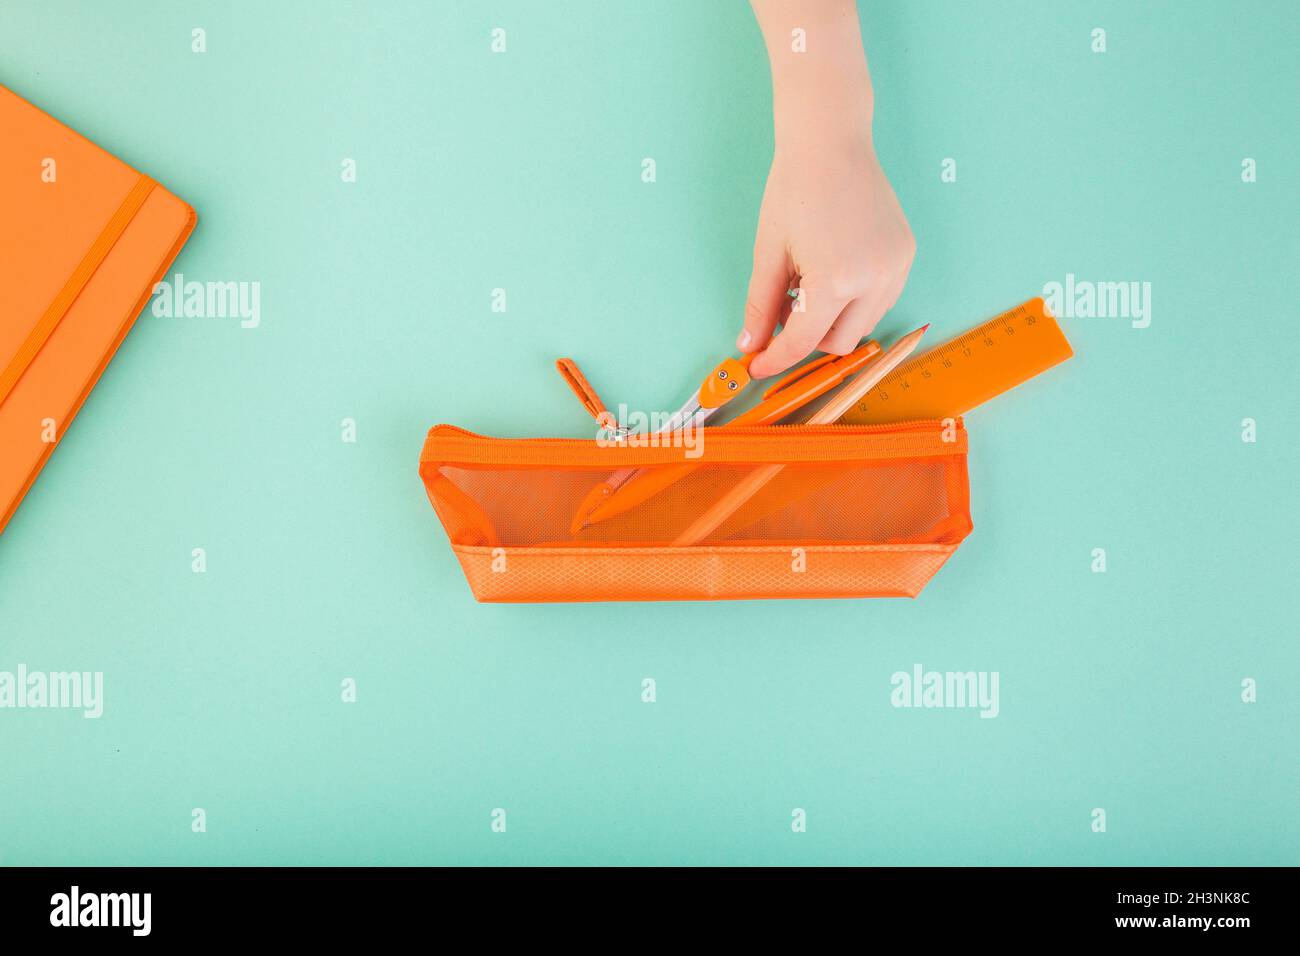 Child's hand keeping all the pencils, pens, scissors, etc. in orange pencil case. Back to school concept Stock Photo